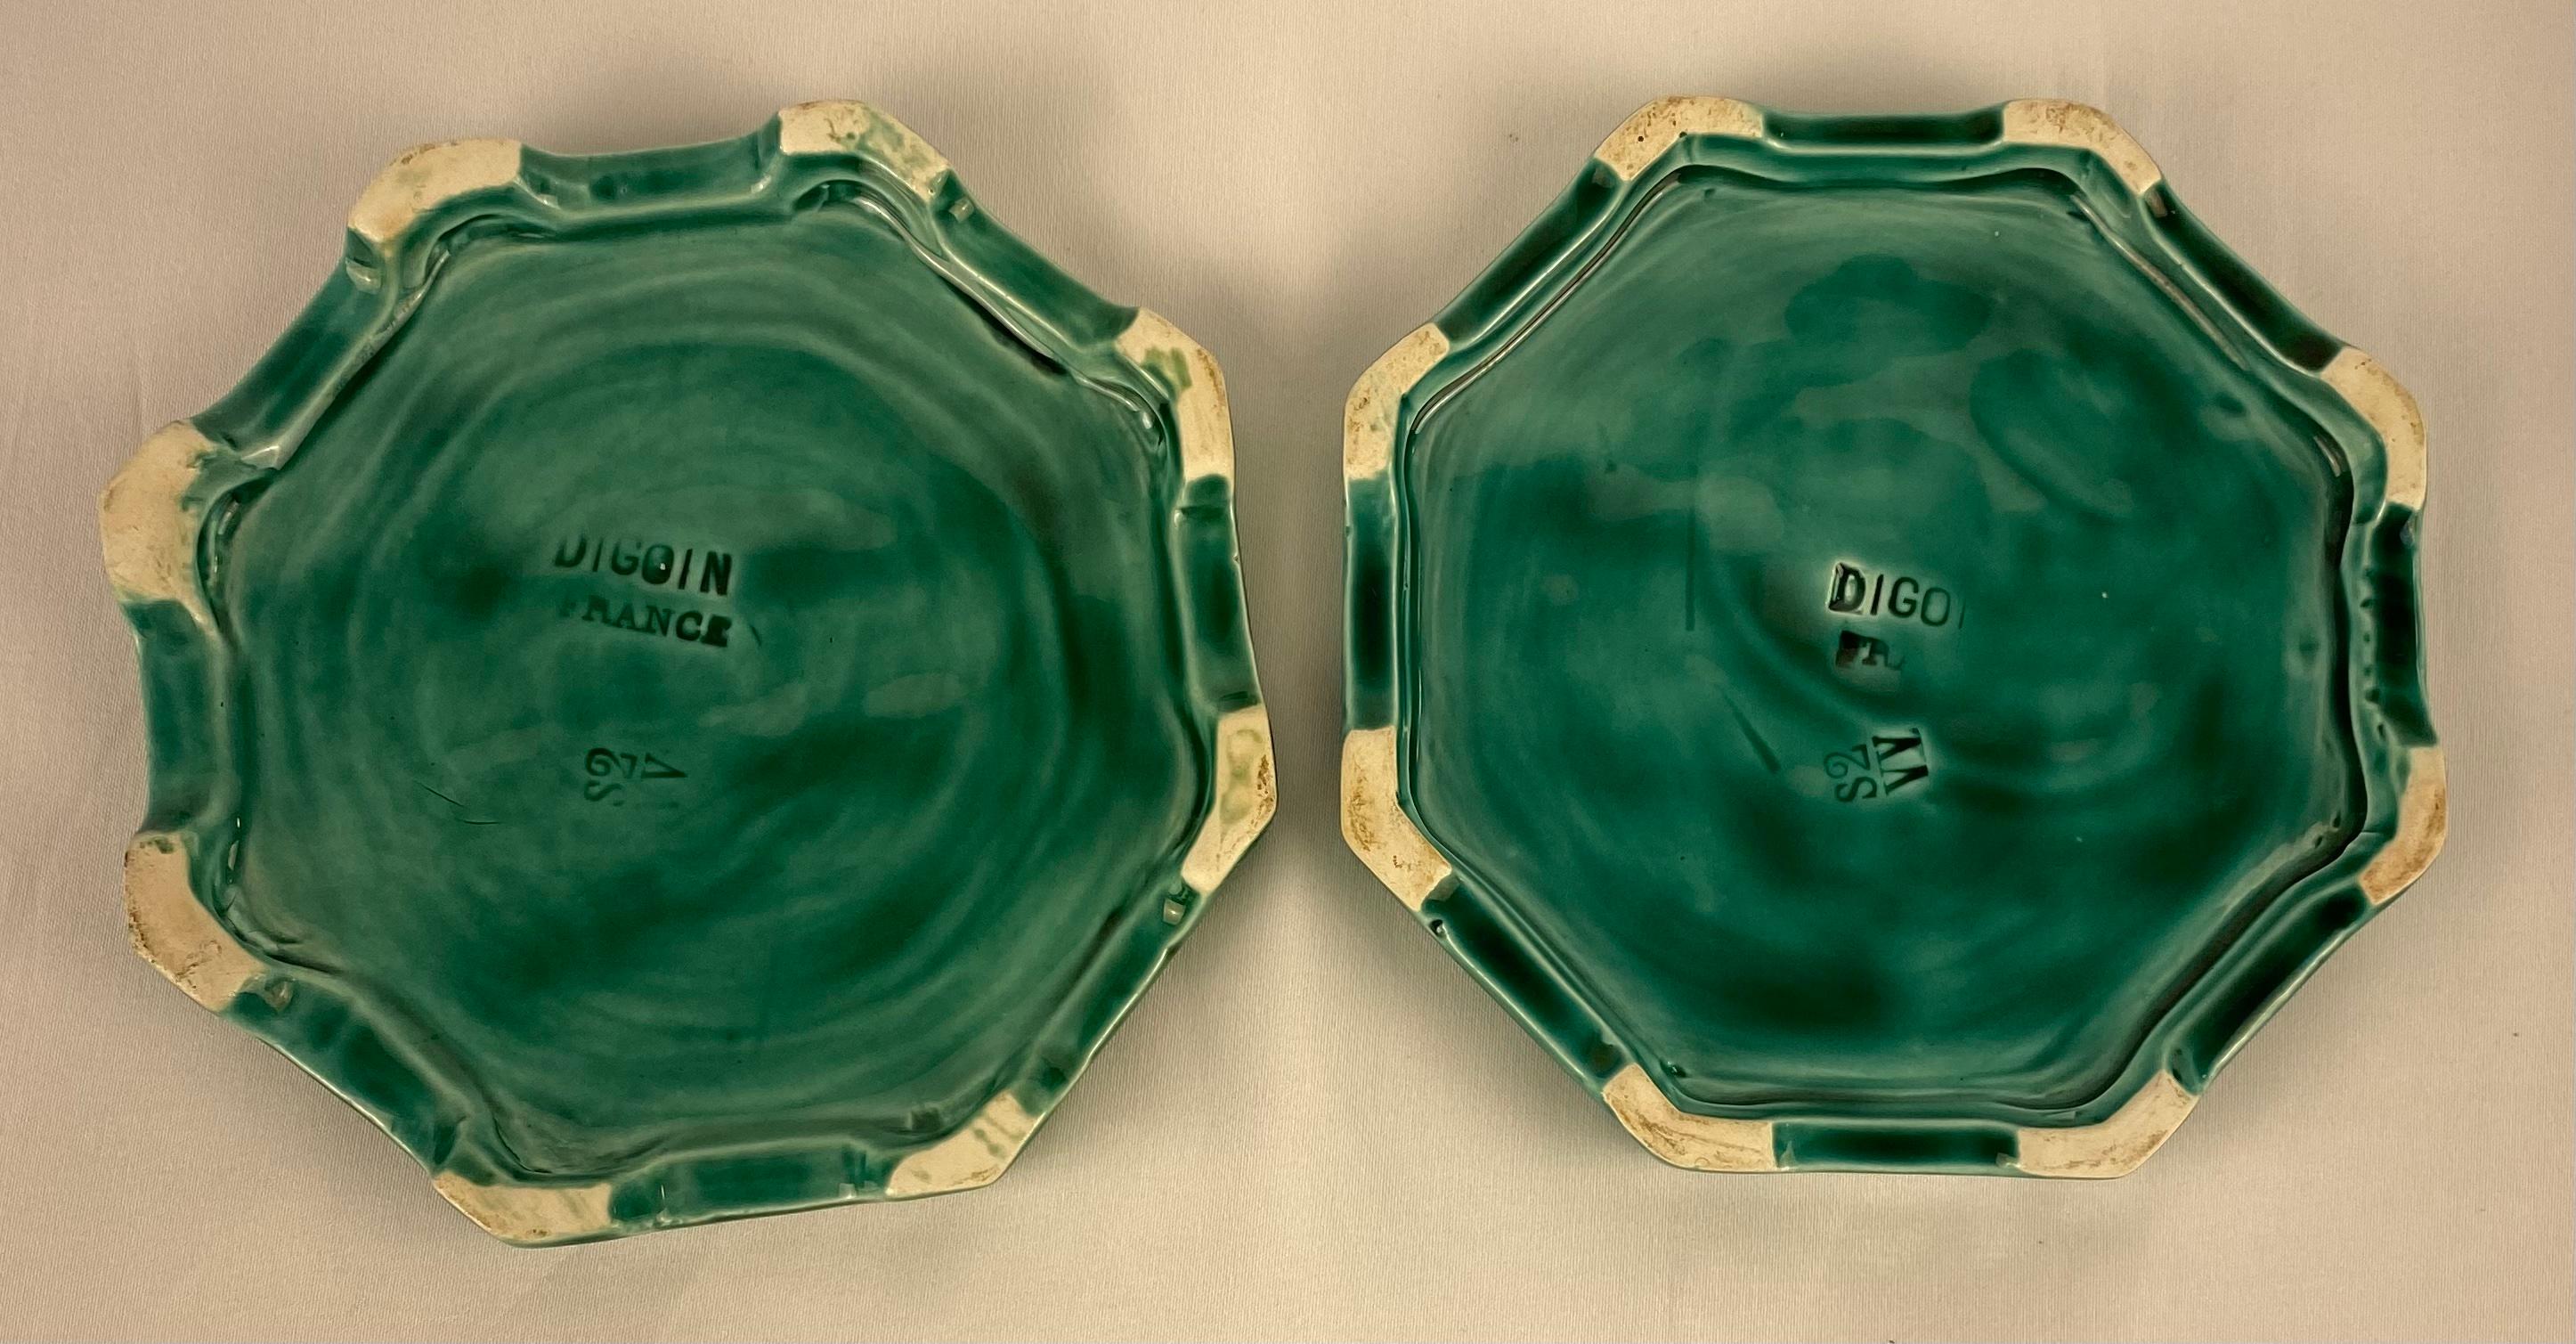 A good quality set of French ceramics by Digoin Sarreguemines, France, circa 1950s. 

The set consists of a large platter or bowl and two generously sized wine bottle coasters to protect your table linens. The eye catching green majolica glaze